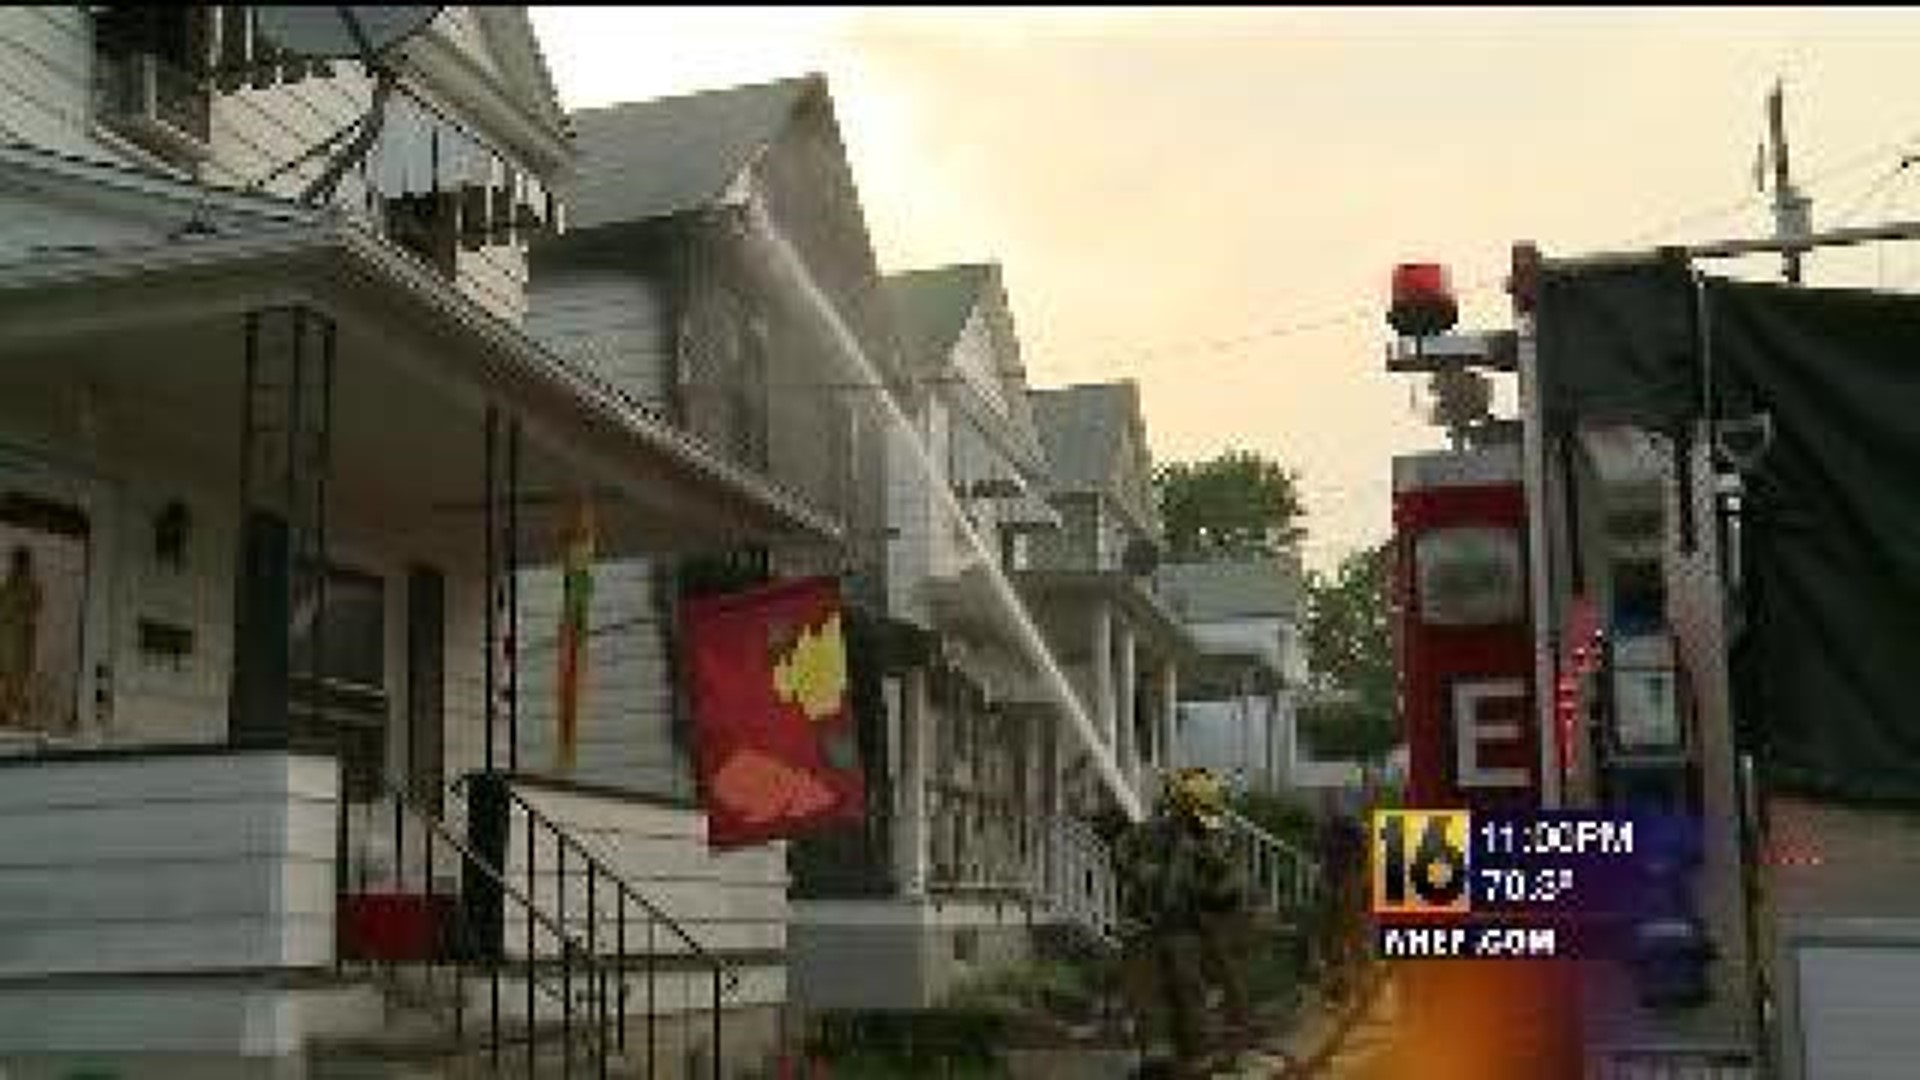 Fire Chief: Woman Dead After Fire In Wilkes-Barre